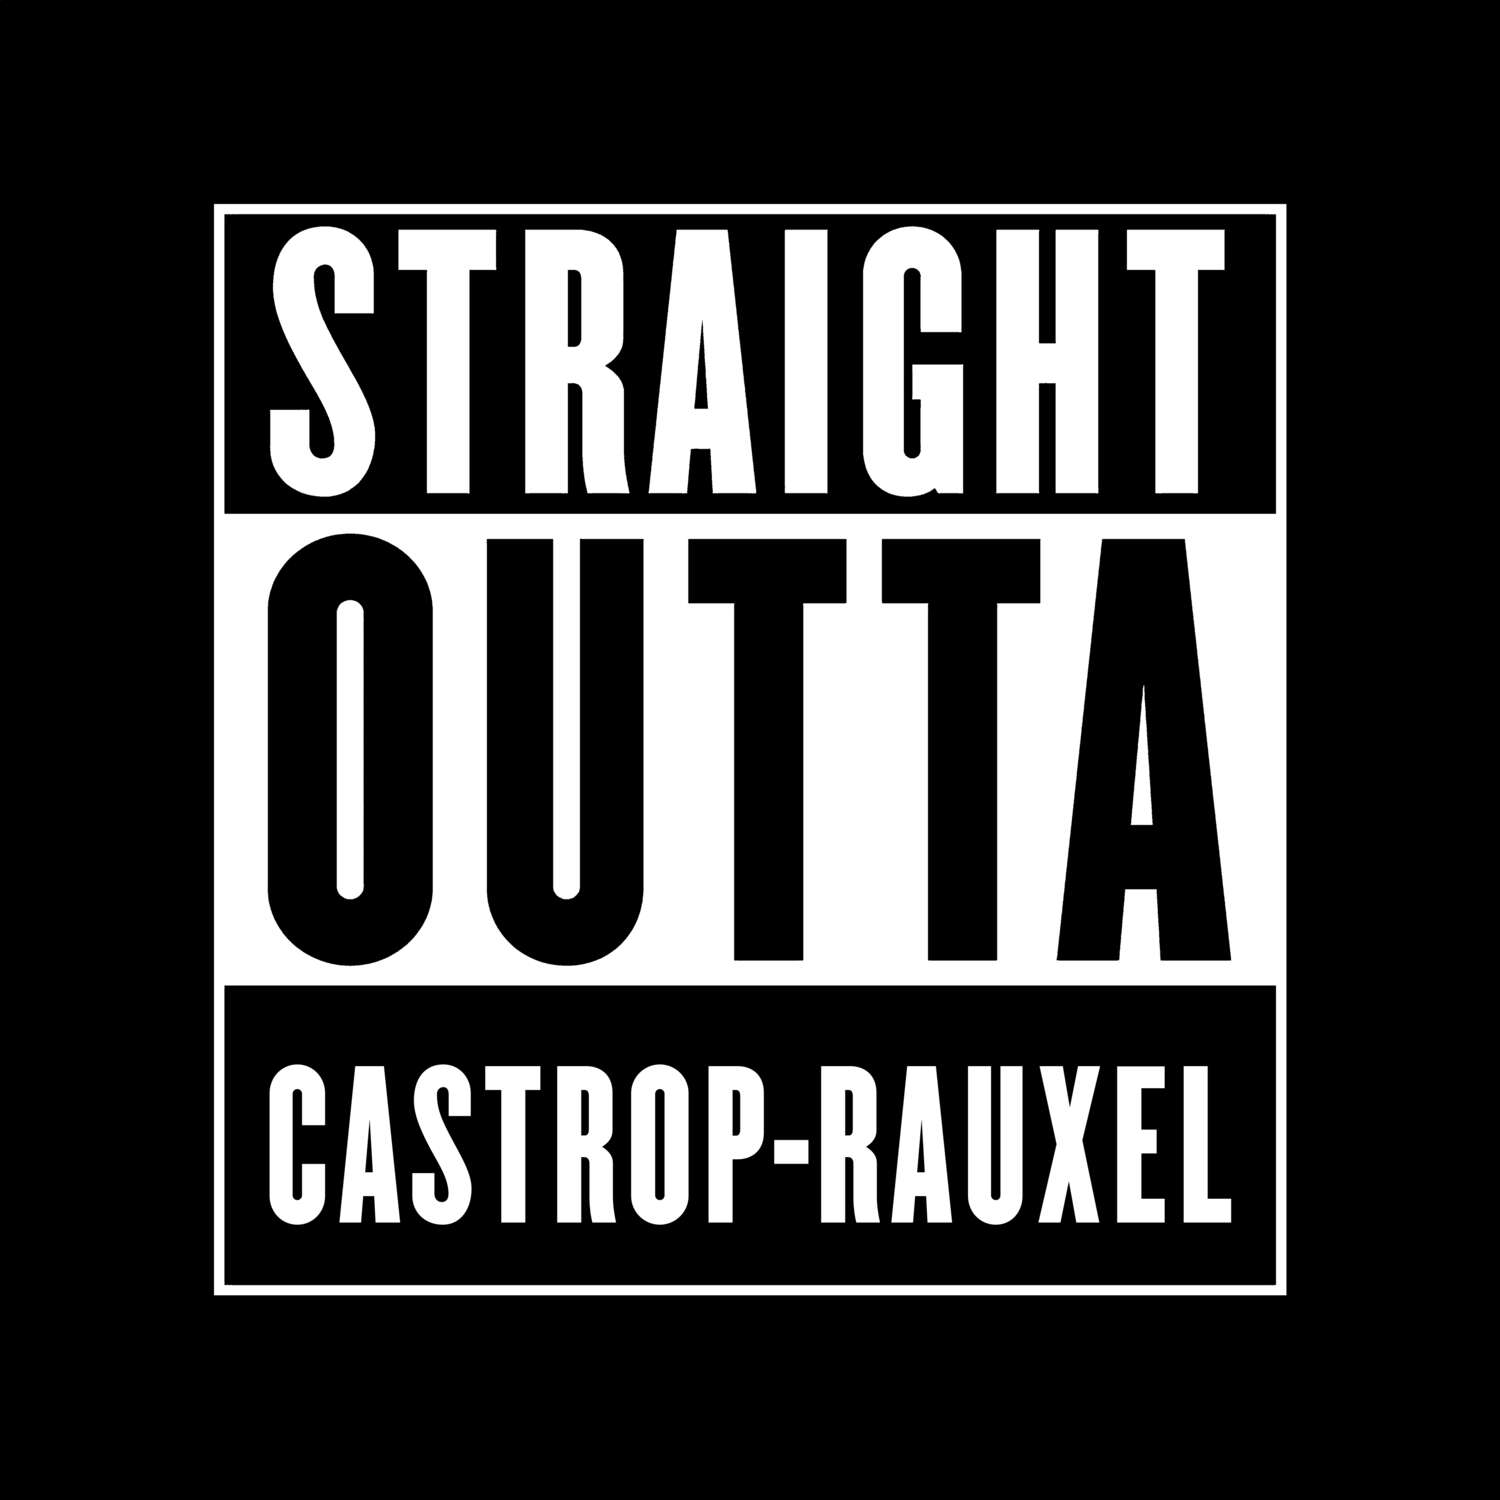 Castrop-Rauxel T-Shirt »Straight Outta«